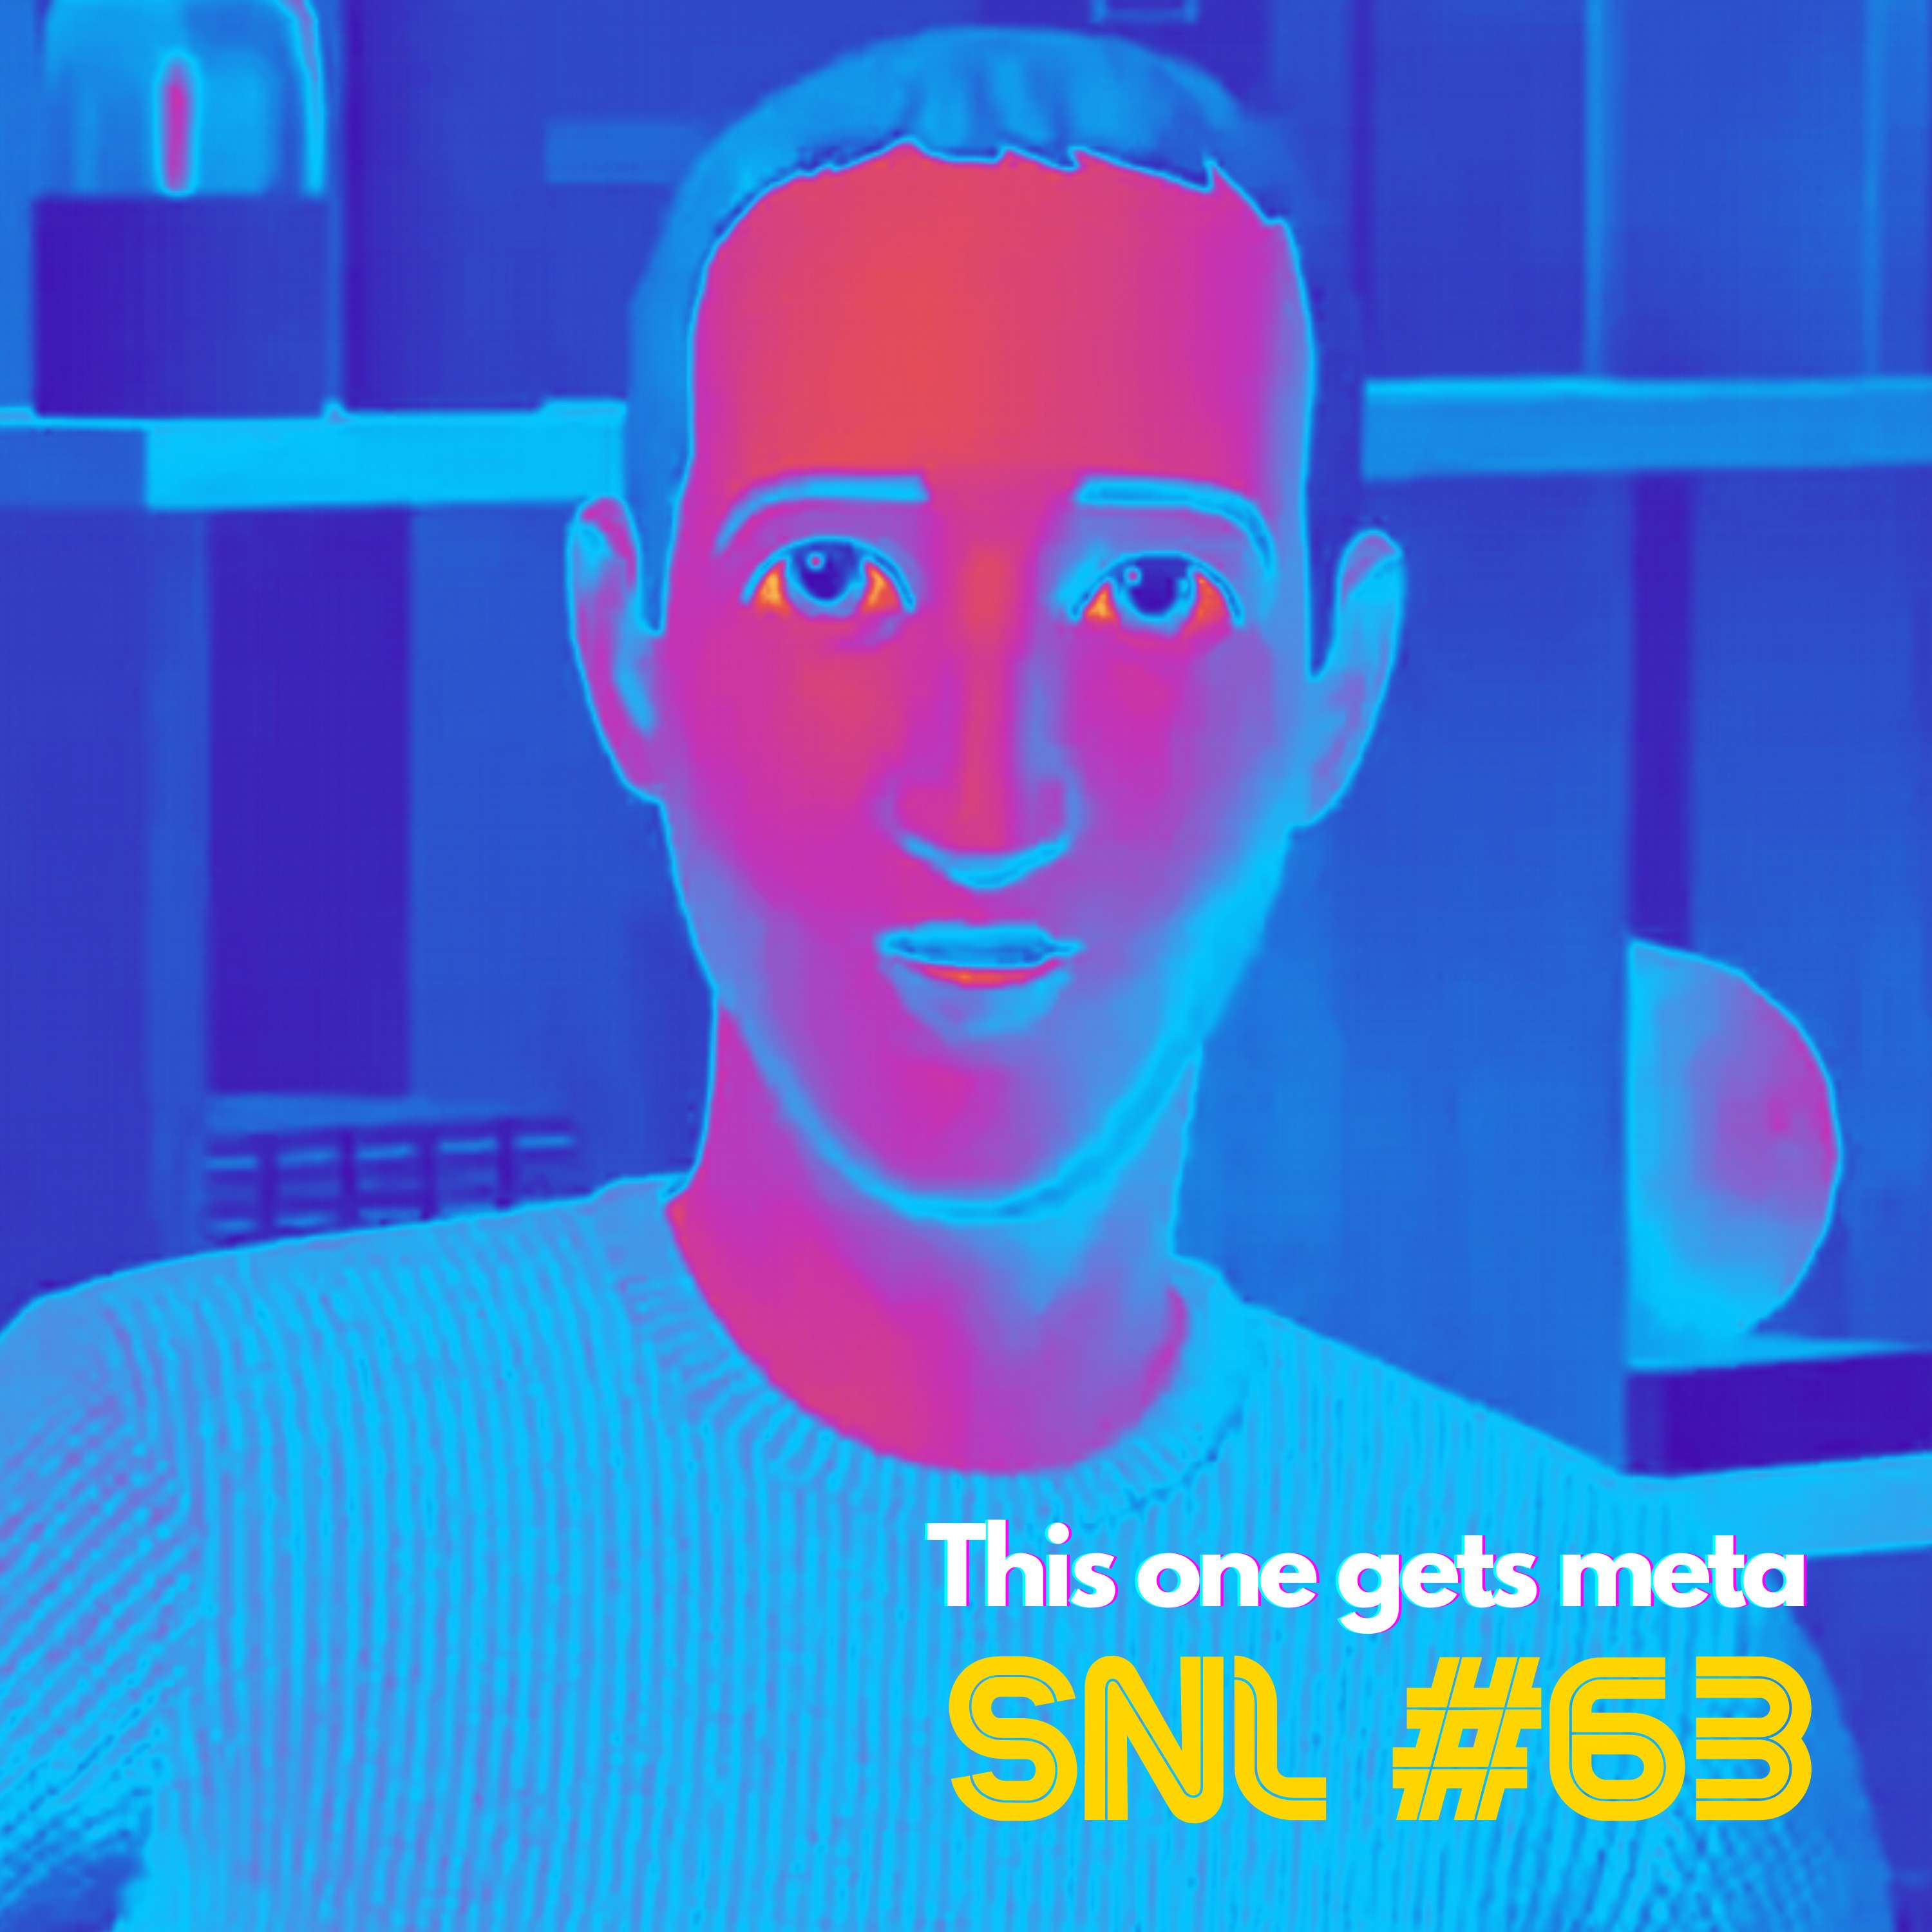 SNL #63: This one gets meta